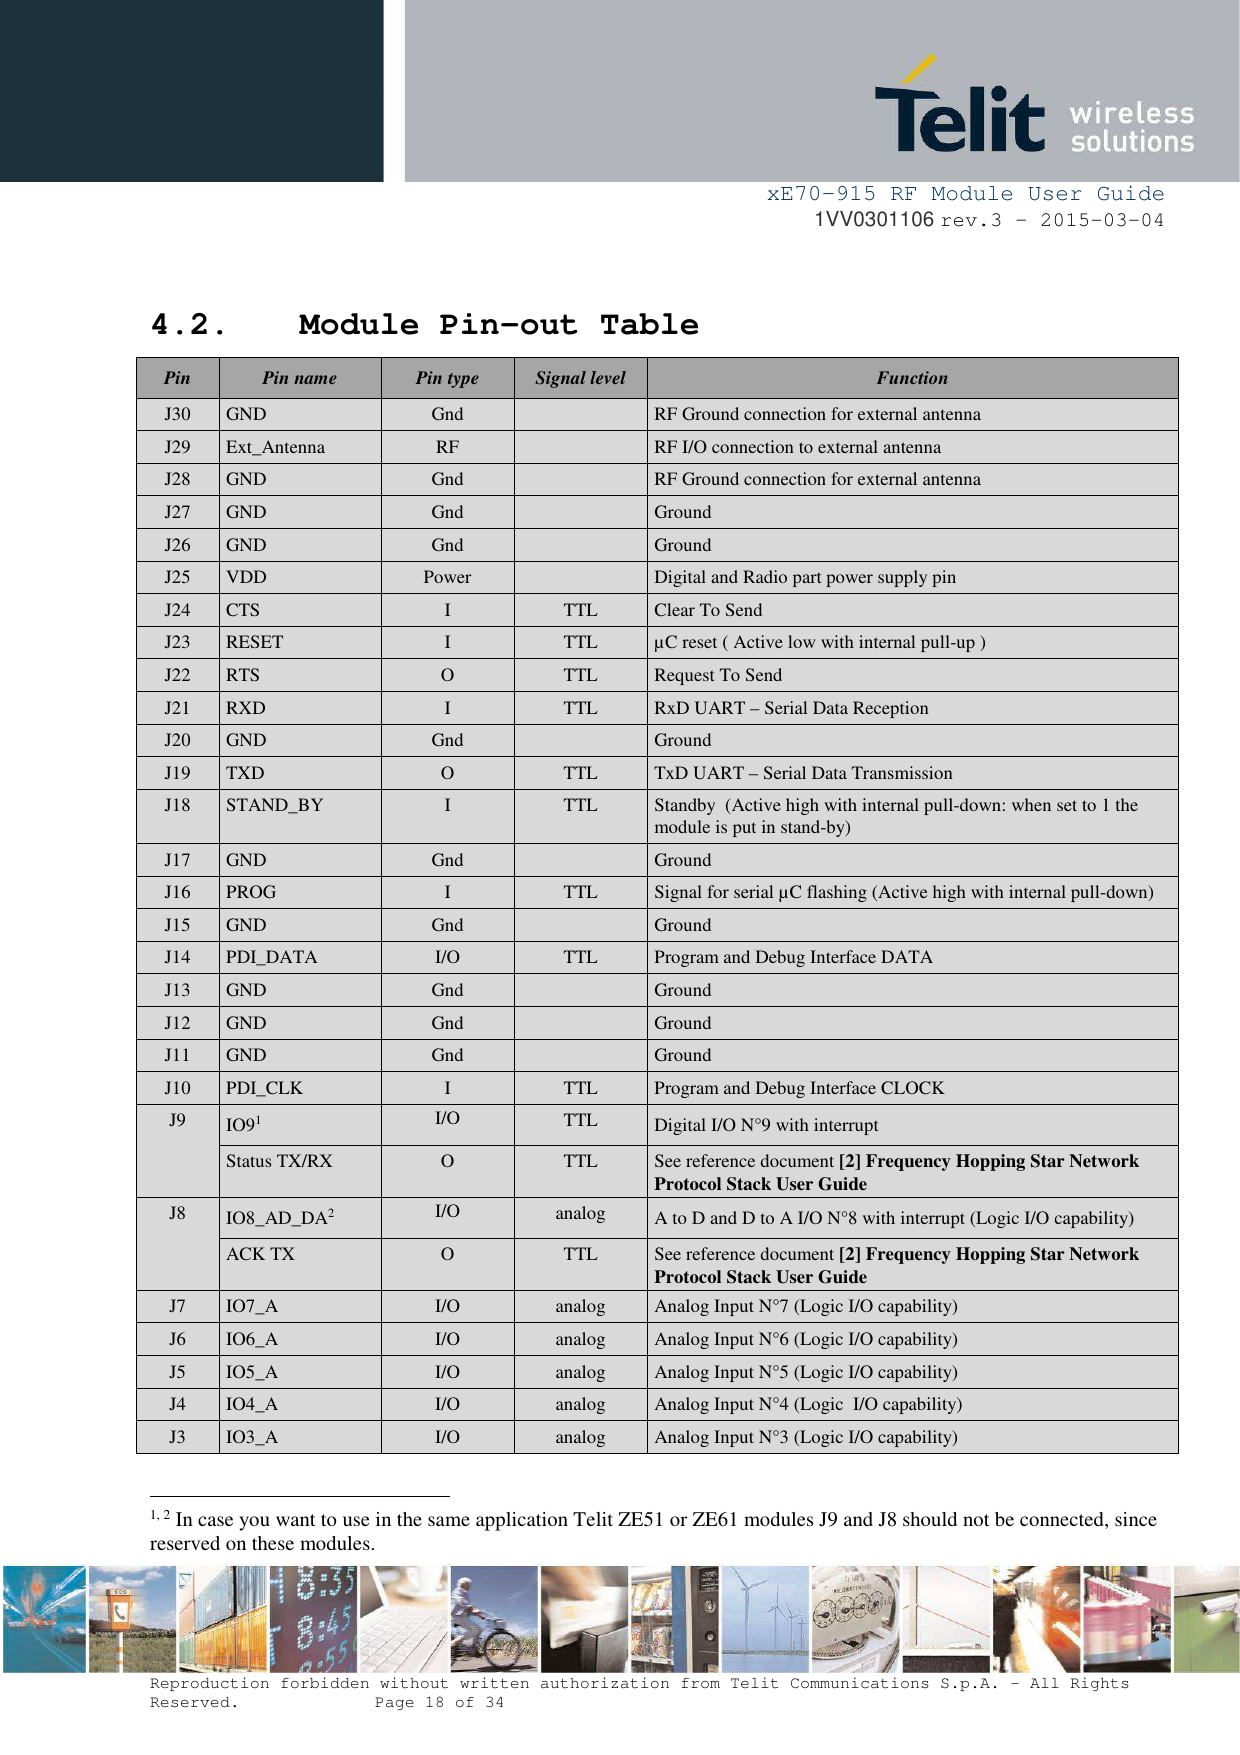     xE70-915 RF Module User Guide 1VV0301106 rev.3 – 2015-03-04  Reproduction forbidden without written authorization from Telit Communications S.p.A. - All Rights Reserved.    Page 18 of 34   4.2. Module Pin-out Table Pin  Pin name  Pin type  Signal level  Function J30  GND  Gnd    RF Ground connection for external antenna  J29  Ext_Antenna  RF    RF I/O connection to external antenna  J28  GND  Gnd    RF Ground connection for external antenna  J27  GND  Gnd    Ground J26  GND  Gnd    Ground J25  VDD   Power    Digital and Radio part power supply pin J24  CTS  I  TTL  Clear To Send J23  RESET  I  TTL  µC reset ( Active low with internal pull-up ) J22  RTS  O  TTL  Request To Send J21  RXD    I  TTL  RxD UART – Serial Data Reception J20  GND  Gnd    Ground J19  TXD    O  TTL  TxD UART – Serial Data Transmission  J18  STAND_BY  I  TTL  Standby  (Active high with internal pull-down: when set to 1 the module is put in stand-by) J17  GND  Gnd    Ground J16  PROG  I  TTL  Signal for serial µC flashing (Active high with internal pull-down) J15  GND  Gnd    Ground J14  PDI_DATA  I/O  TTL  Program and Debug Interface DATA J13  GND  Gnd    Ground J12  GND  Gnd    Ground J11  GND  Gnd    Ground J10  PDI_CLK  I  TTL  Program and Debug Interface CLOCK J9  IO91 I/O  TTL  Digital I/O N°9 with interrupt Status TX/RX  O  TTL  See reference document [2] Frequency Hopping Star Network Protocol Stack User Guide J8  IO8_AD_DA2 I/O  analog  A to D and D to A I/O N°8 with interrupt (Logic I/O capability) ACK TX  O  TTL  See reference document [2] Frequency Hopping Star Network Protocol Stack User Guide J7  IO7_A  I/O  analog  Analog Input N°7 (Logic I/O capability) J6  IO6_A  I/O  analog  Analog Input N°6 (Logic I/O capability) J5  IO5_A  I/O  analog  Analog Input N°5 (Logic I/O capability) J4  IO4_A  I/O  analog  Analog Input N°4 (Logic  I/O capability) J3  IO3_A  I/O  analog  Analog Input N°3 (Logic I/O capability)                                                       1, 2 In case you want to use in the same application Telit ZE51 or ZE61 modules J9 and J8 should not be connected, since reserved on these modules.   